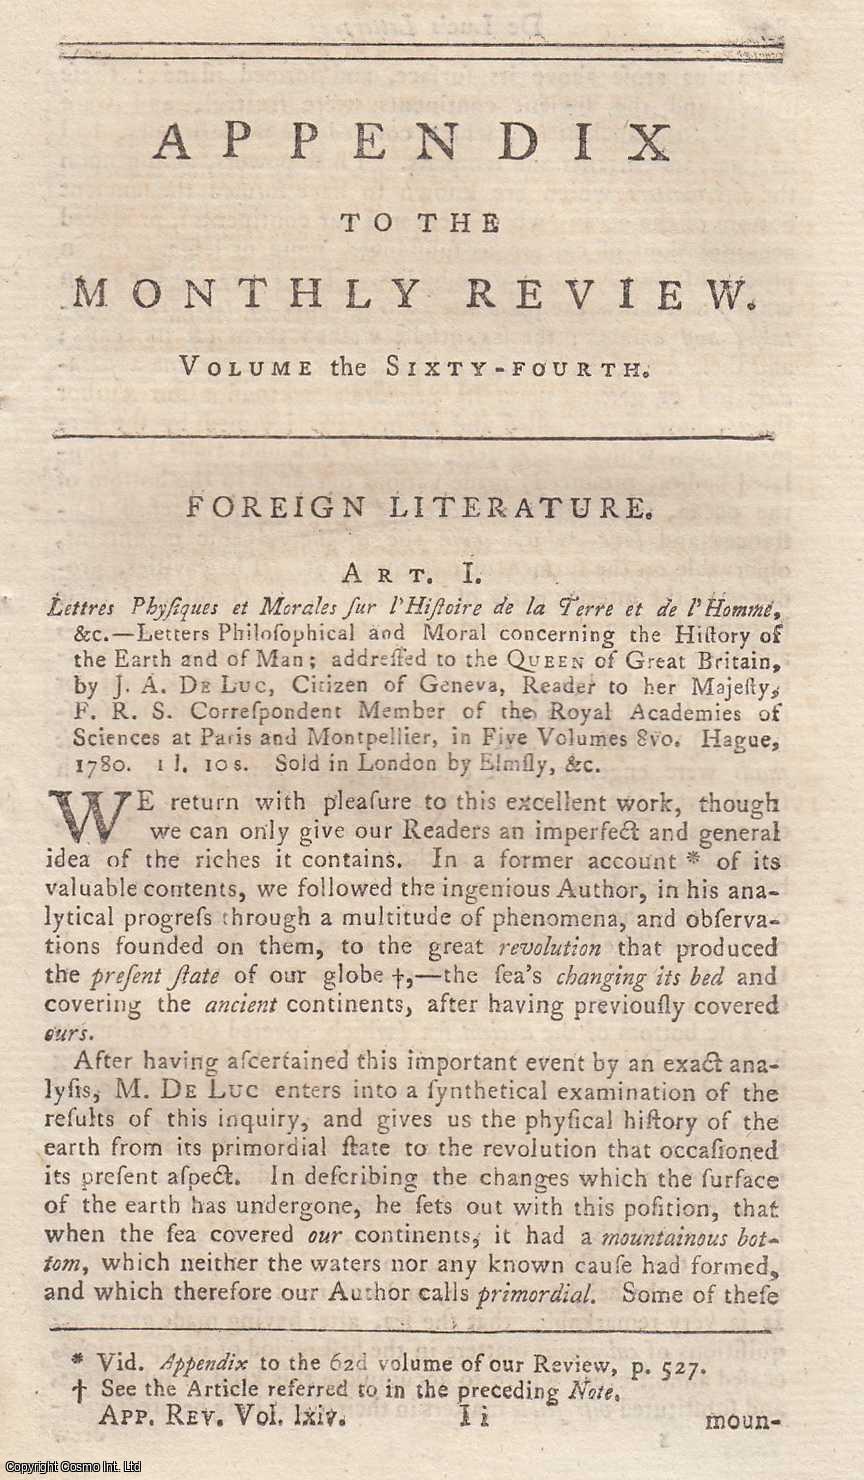 Author Not Stated - Letters Philosophical and Moral concerning the History of the Earth and of Man; addressed to the Queen of Great Britain, by J.A. De Luc, Citizen of Geneva. An original article from the Monthly Review, 1756.